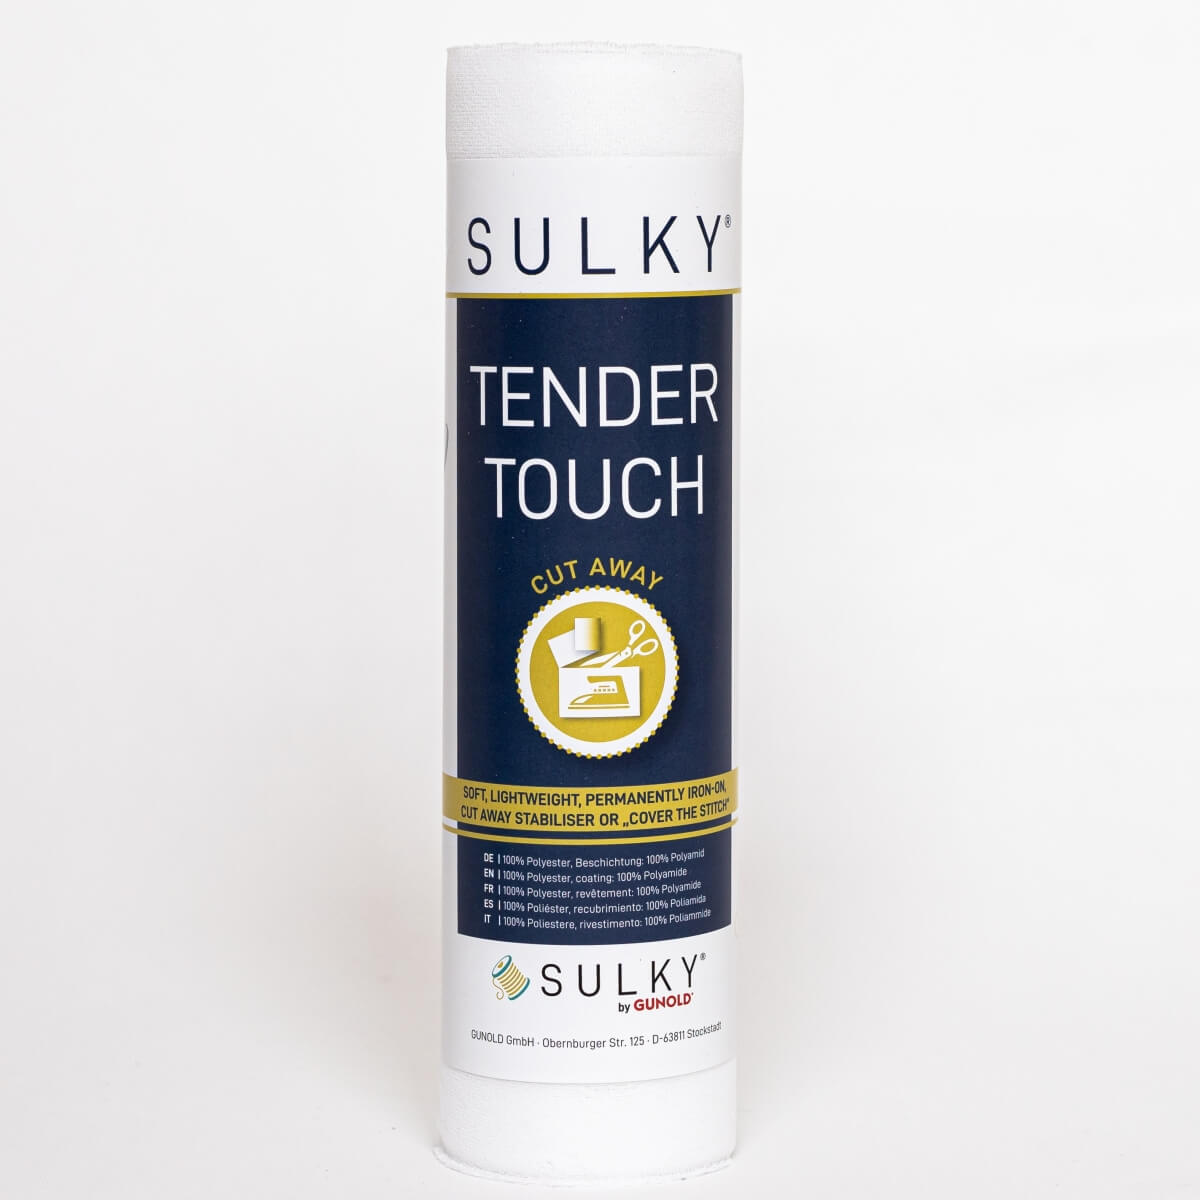 Sulky Tender Touch, Permanent Iron-on Stabilizer White, Medium Weight 2  664-010in X 36in 